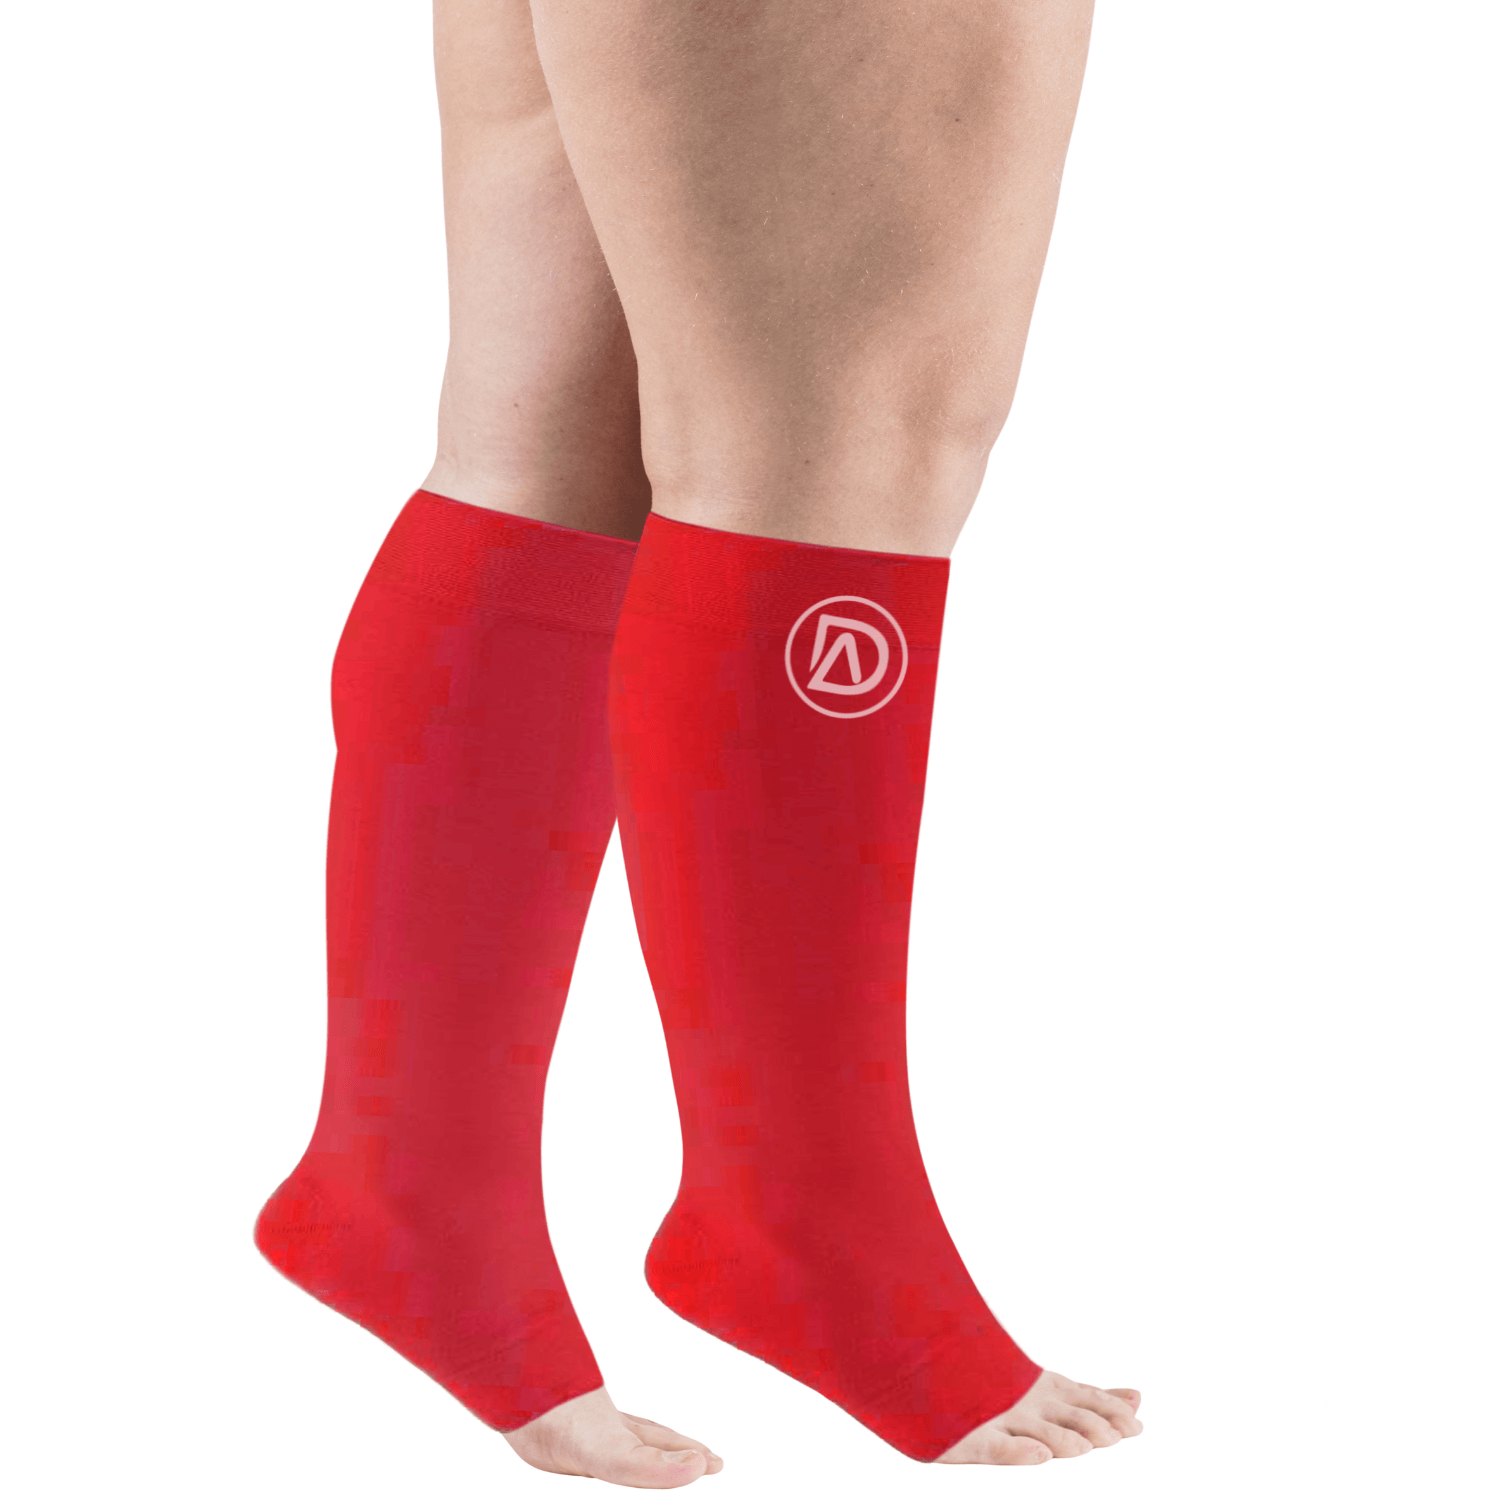 Dominion Active WIDE Calf Compression Sleeves (1 Pair) 20-30 mmHg